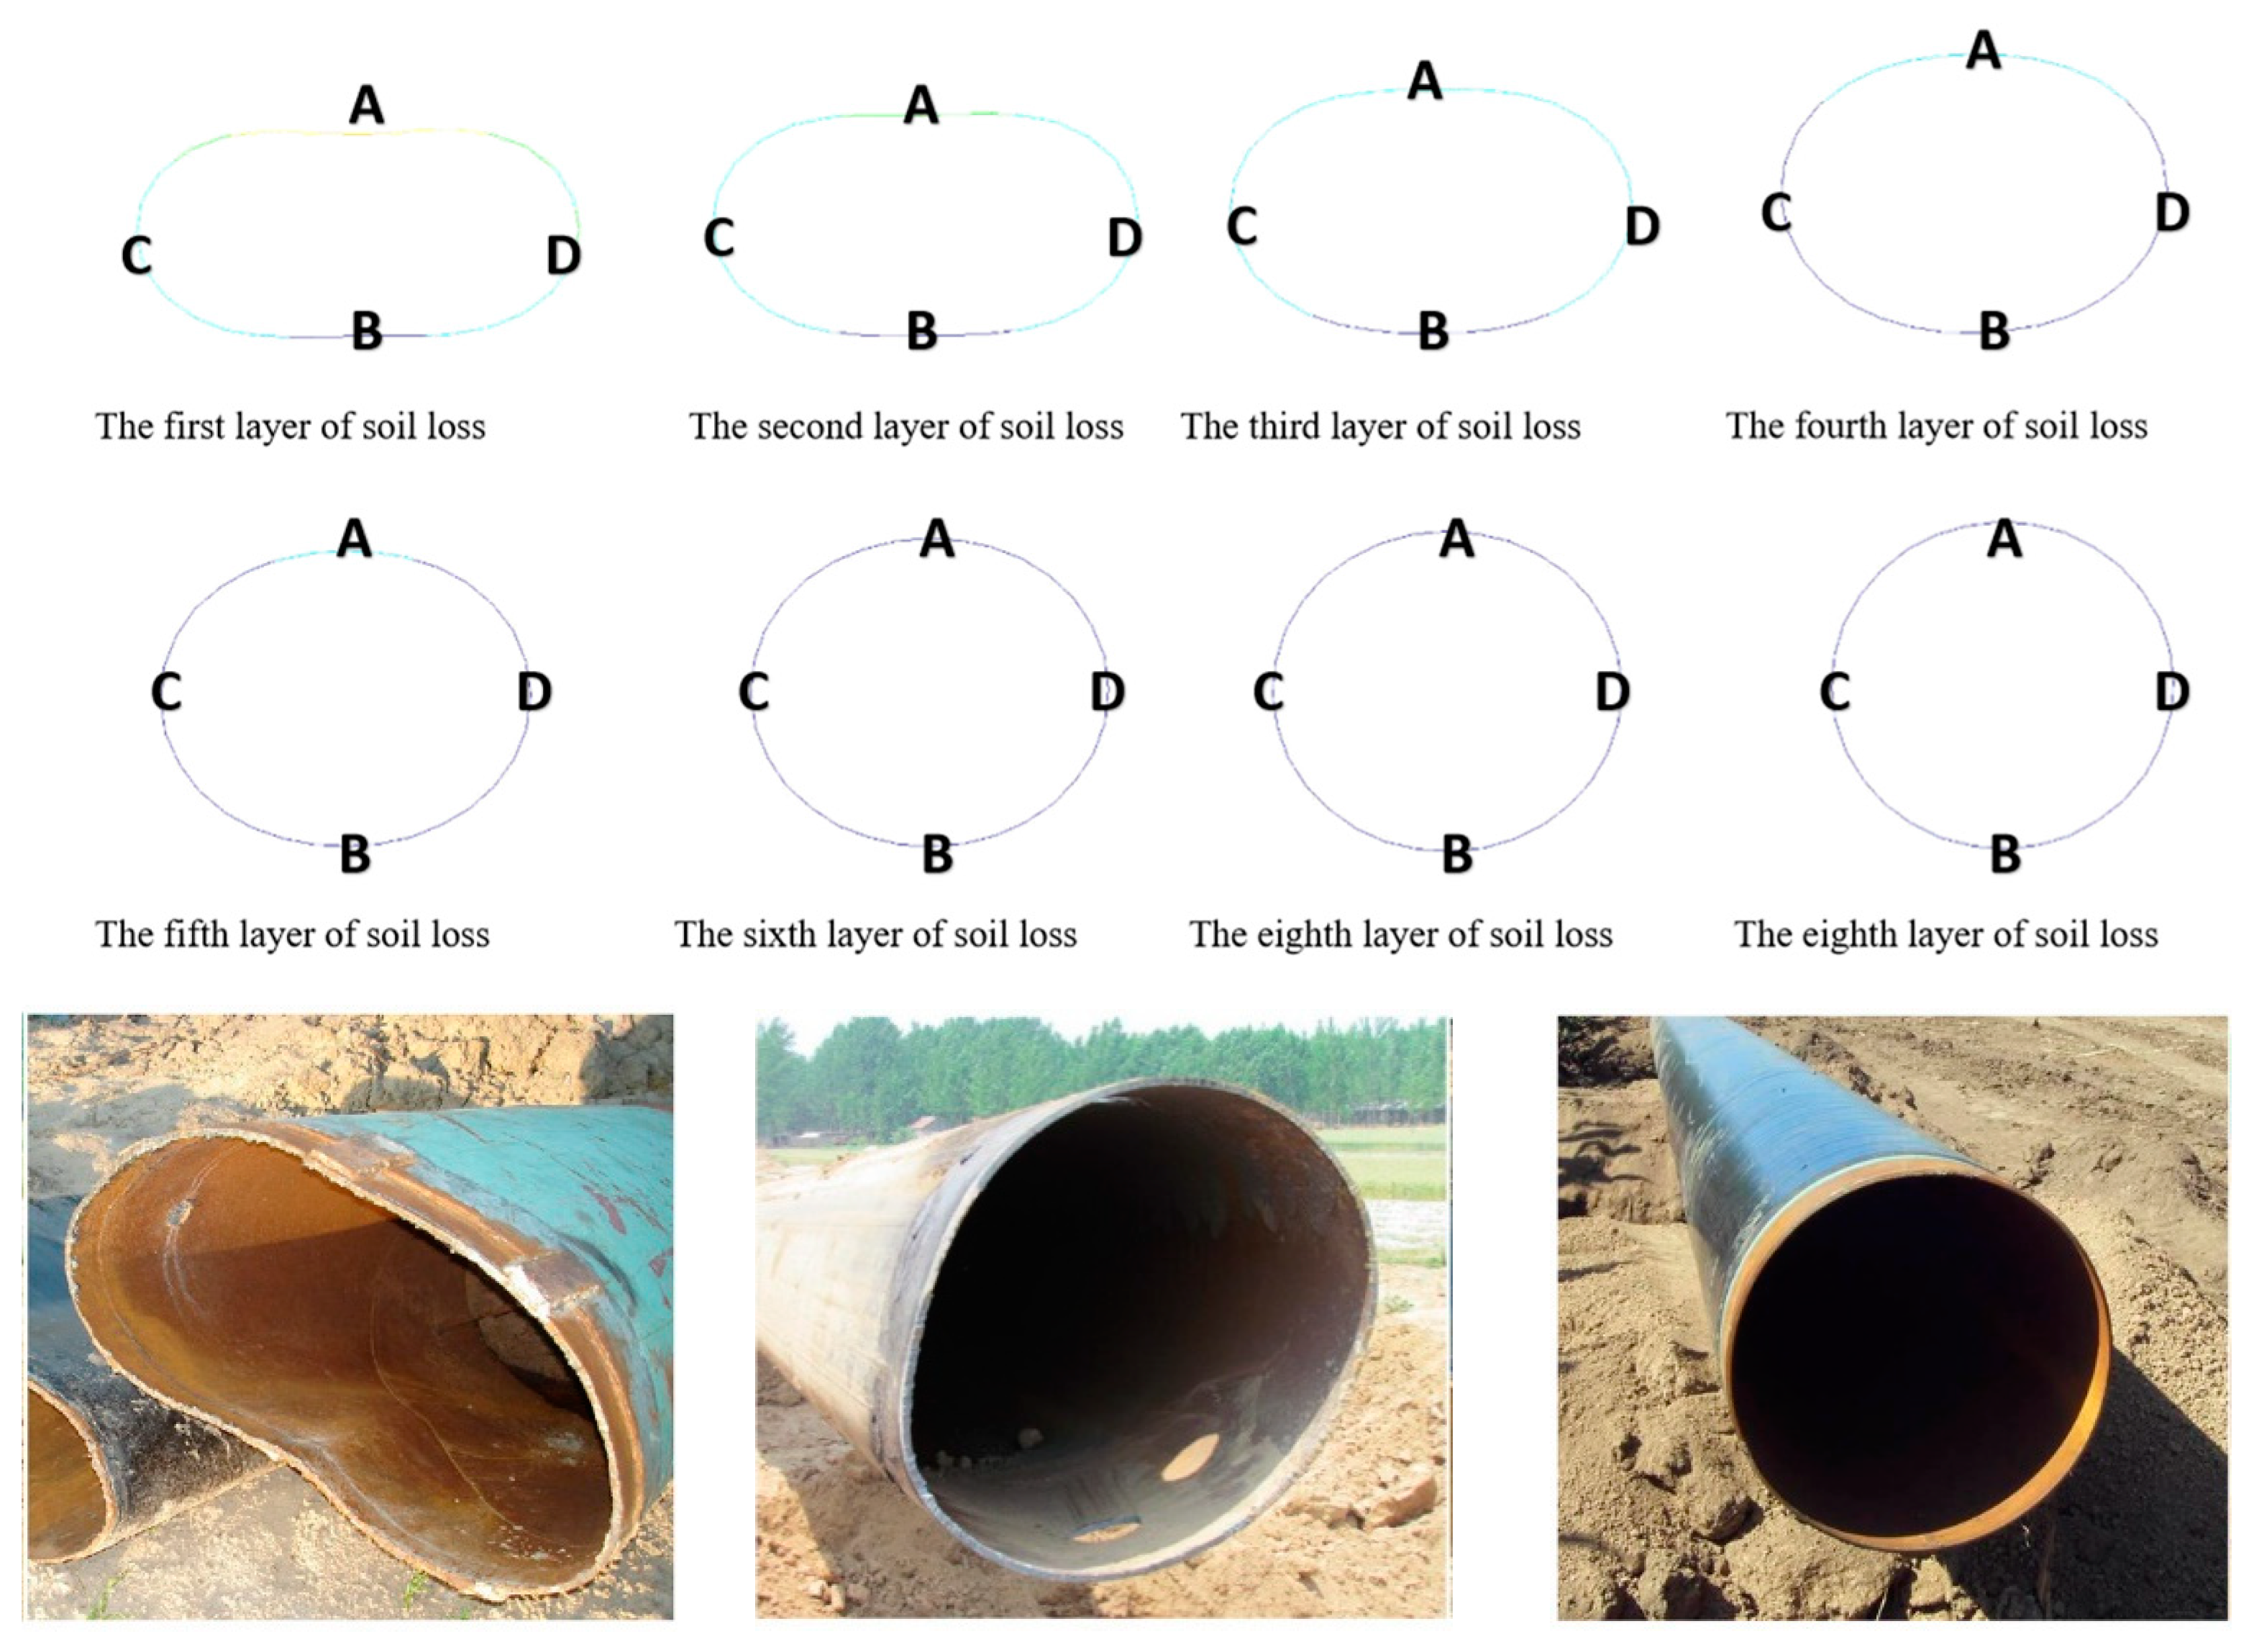 Bearing capacity mechanisms for pipes buried in sand